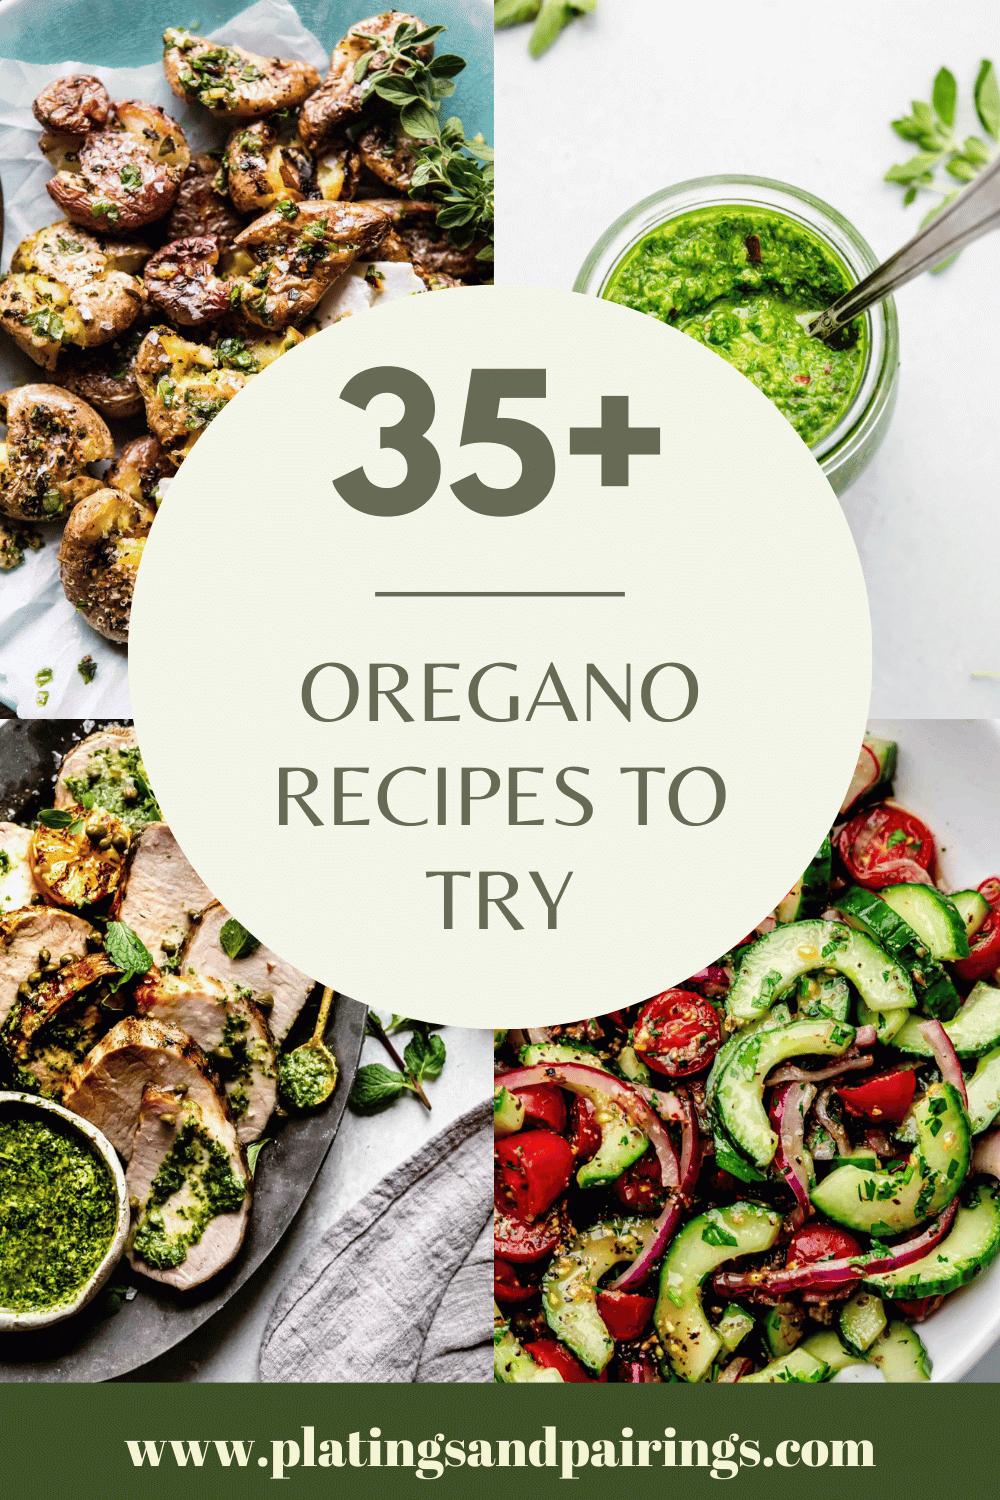 Collage of oregano recipes with text overlay.